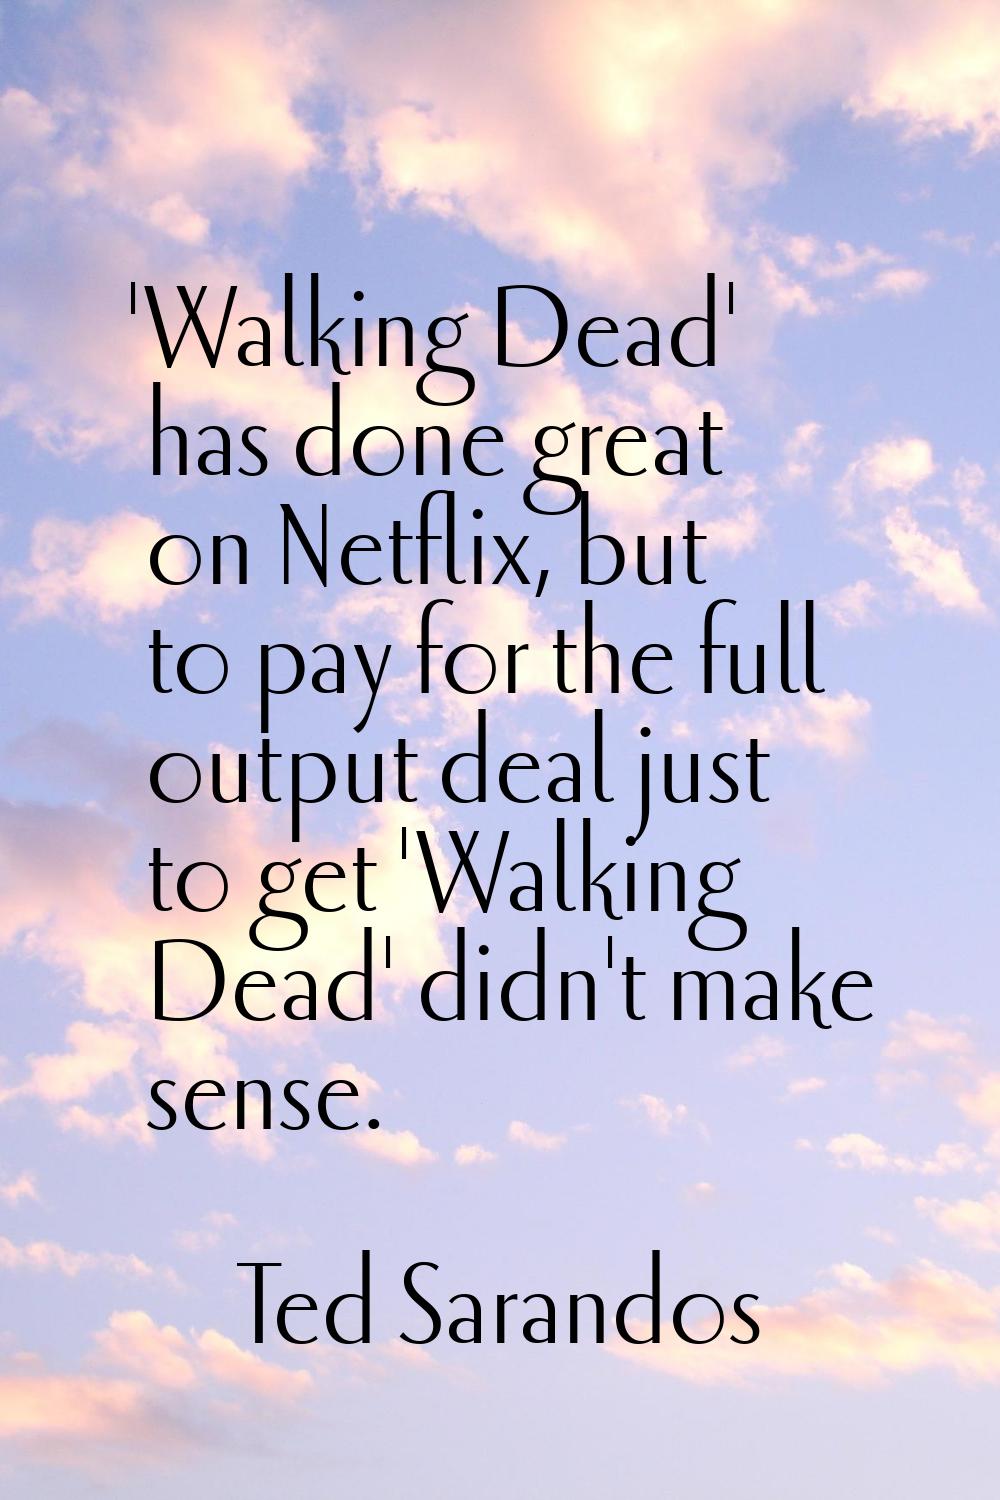 'Walking Dead' has done great on Netflix, but to pay for the full output deal just to get 'Walking 